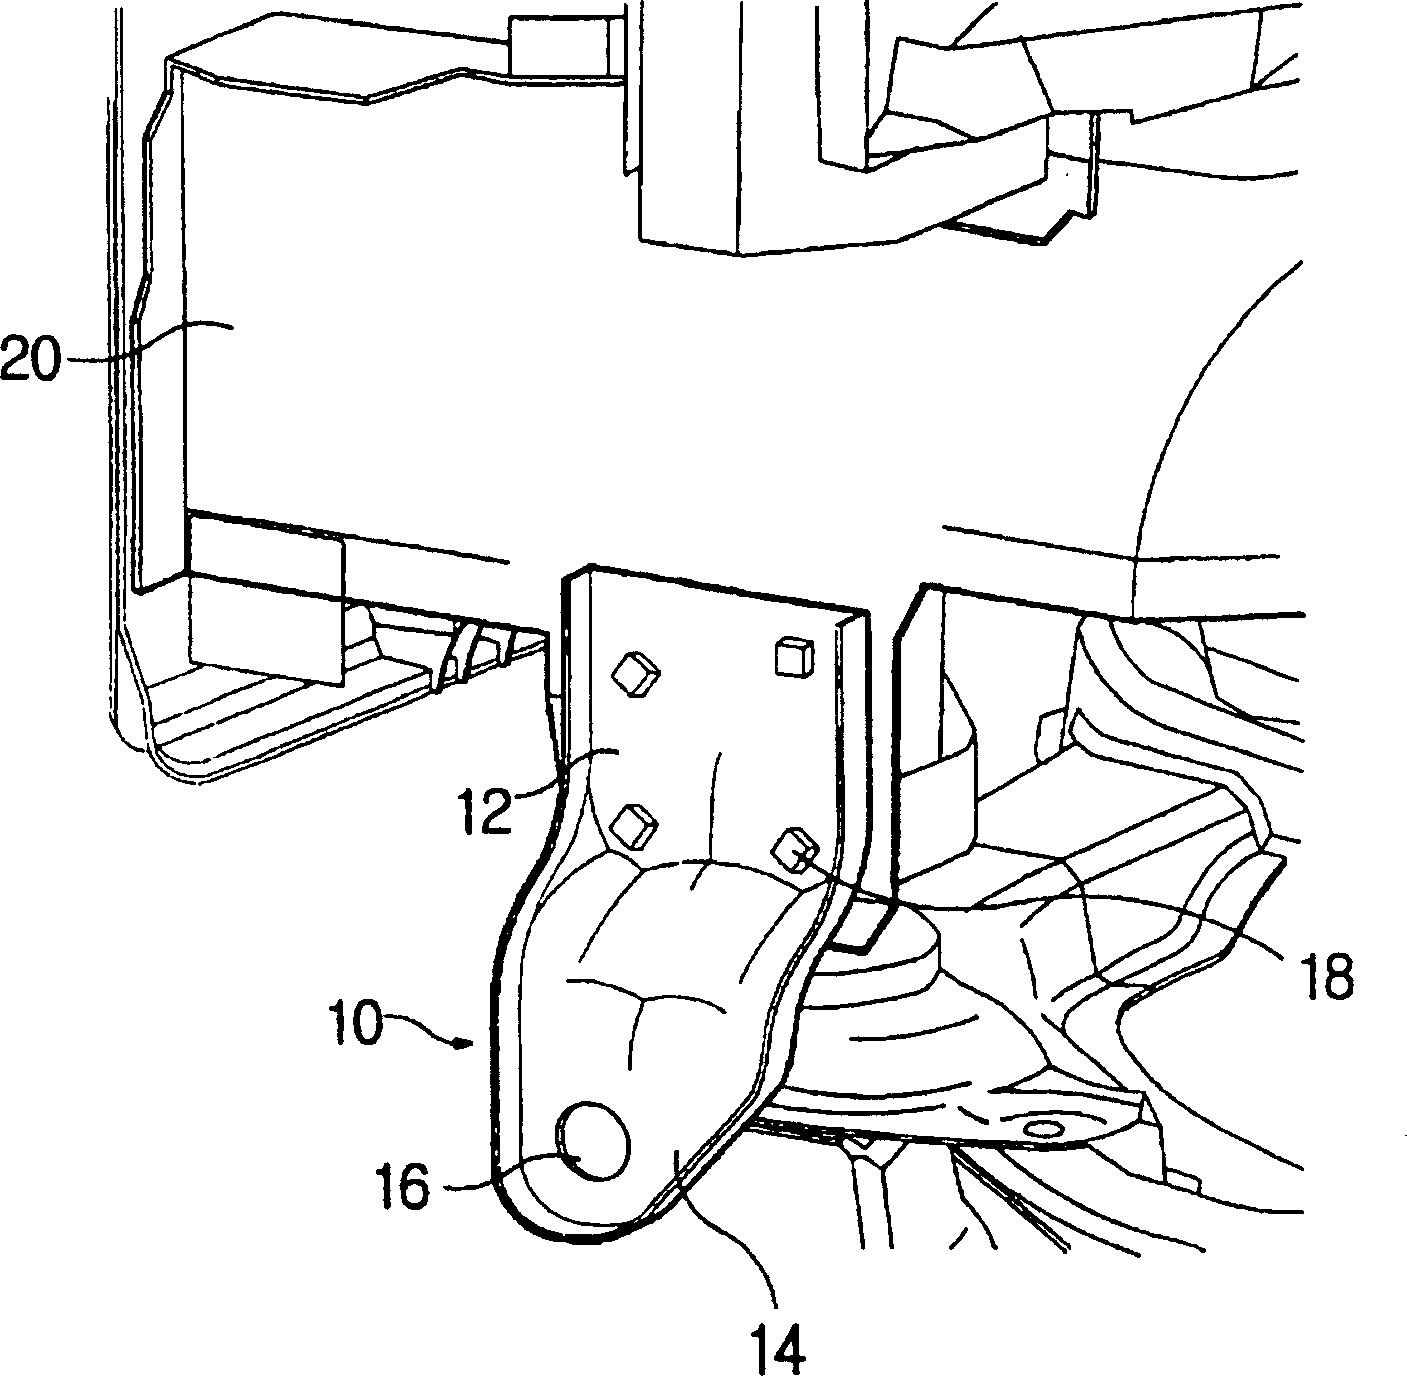 Front shipping hook assembly for vehicle